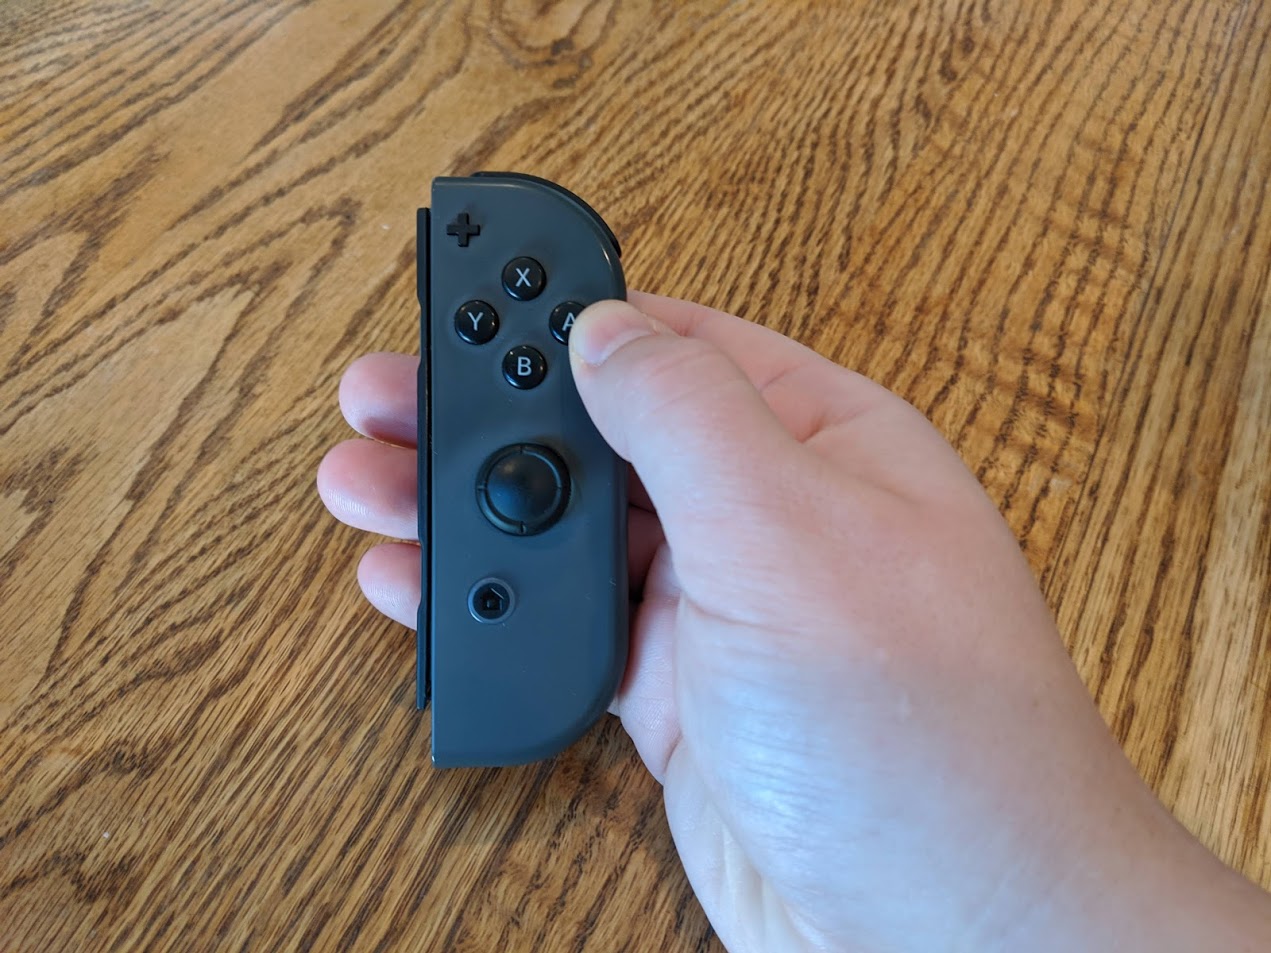 How to pair Joy-Cons Nintendo Switch Lite: When Joy-Cons show up as you want press the A button to continue.